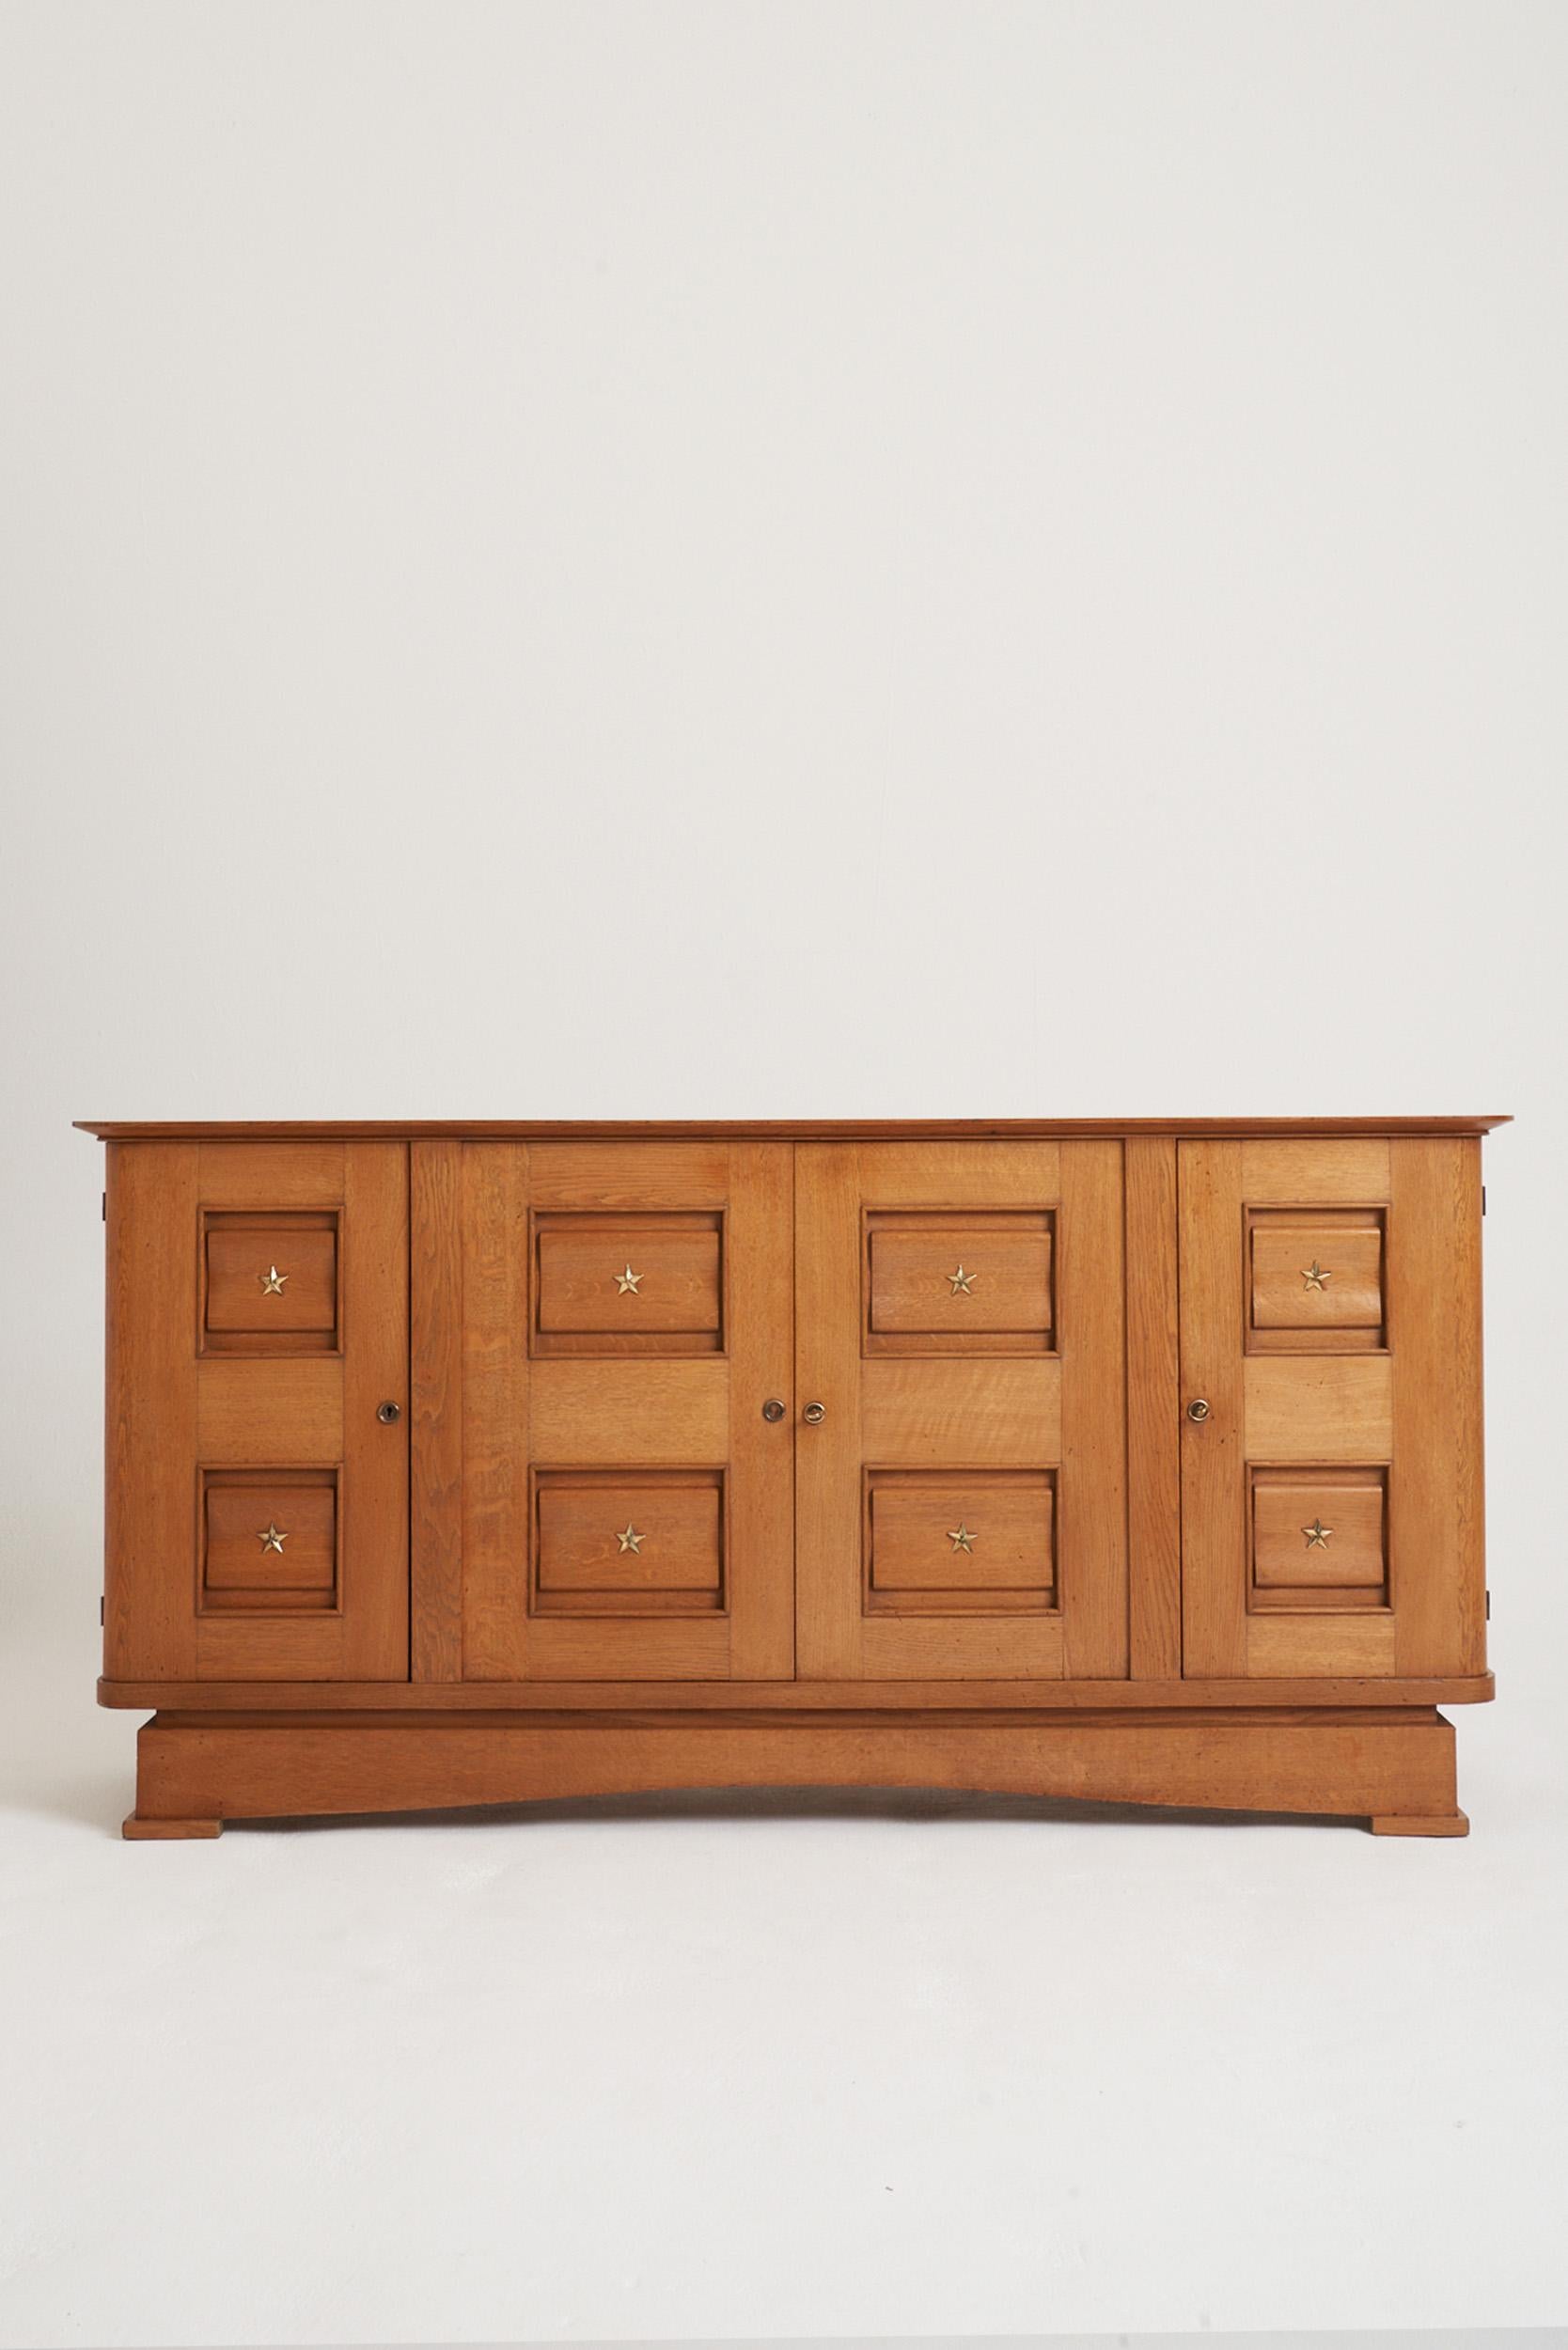 A high quality four-door oak sideboard, with bronze stars adornments.
France, circa 1940.